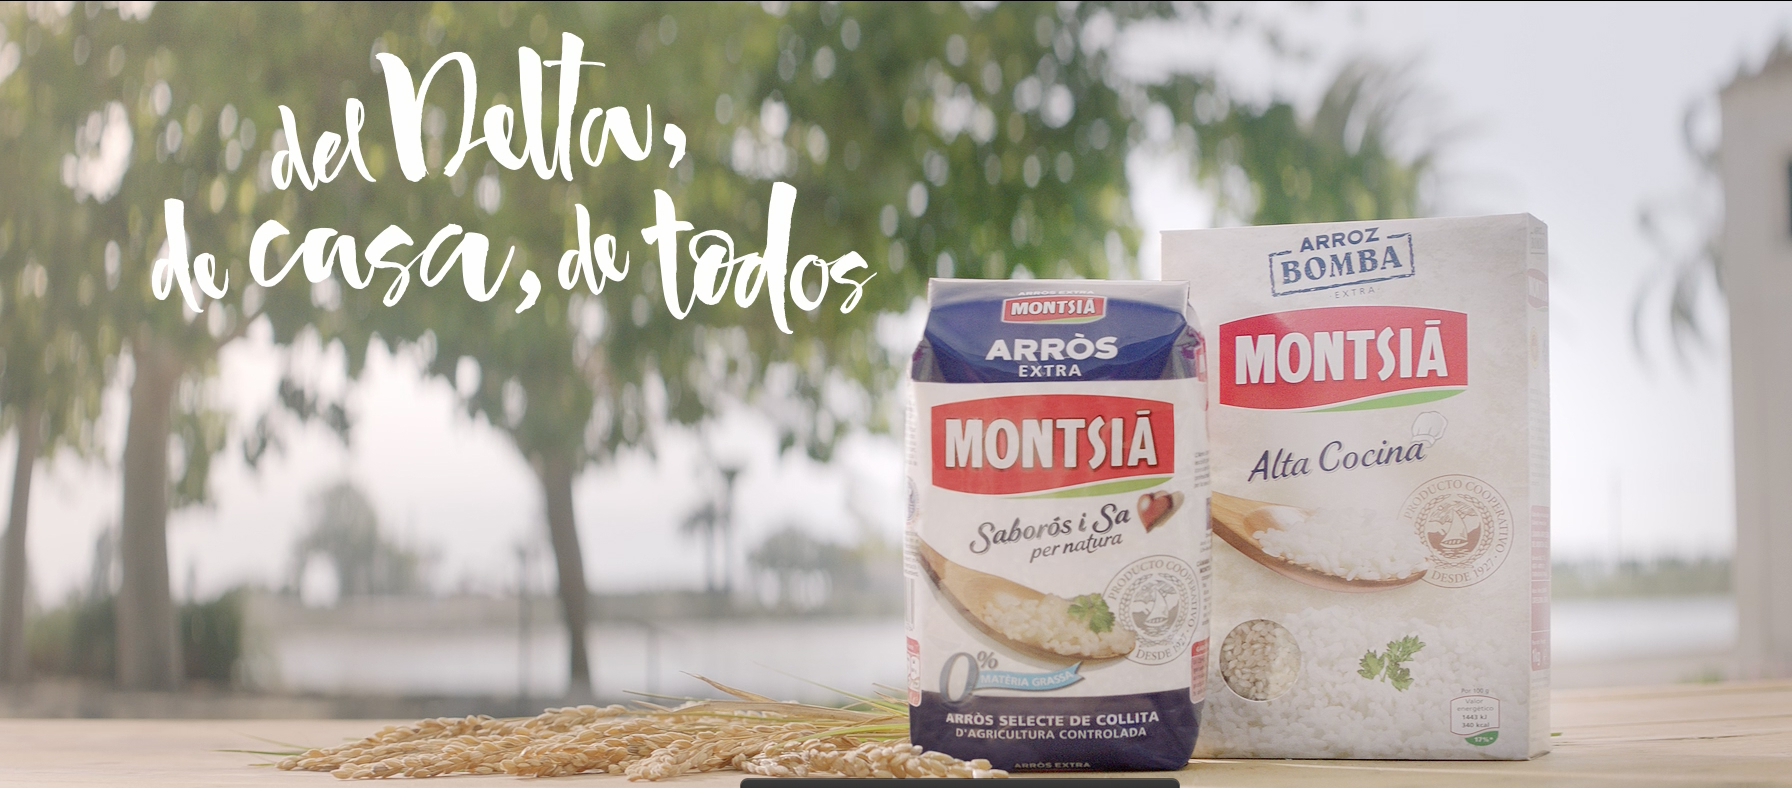 Montsià rice, from the Delta to your TV